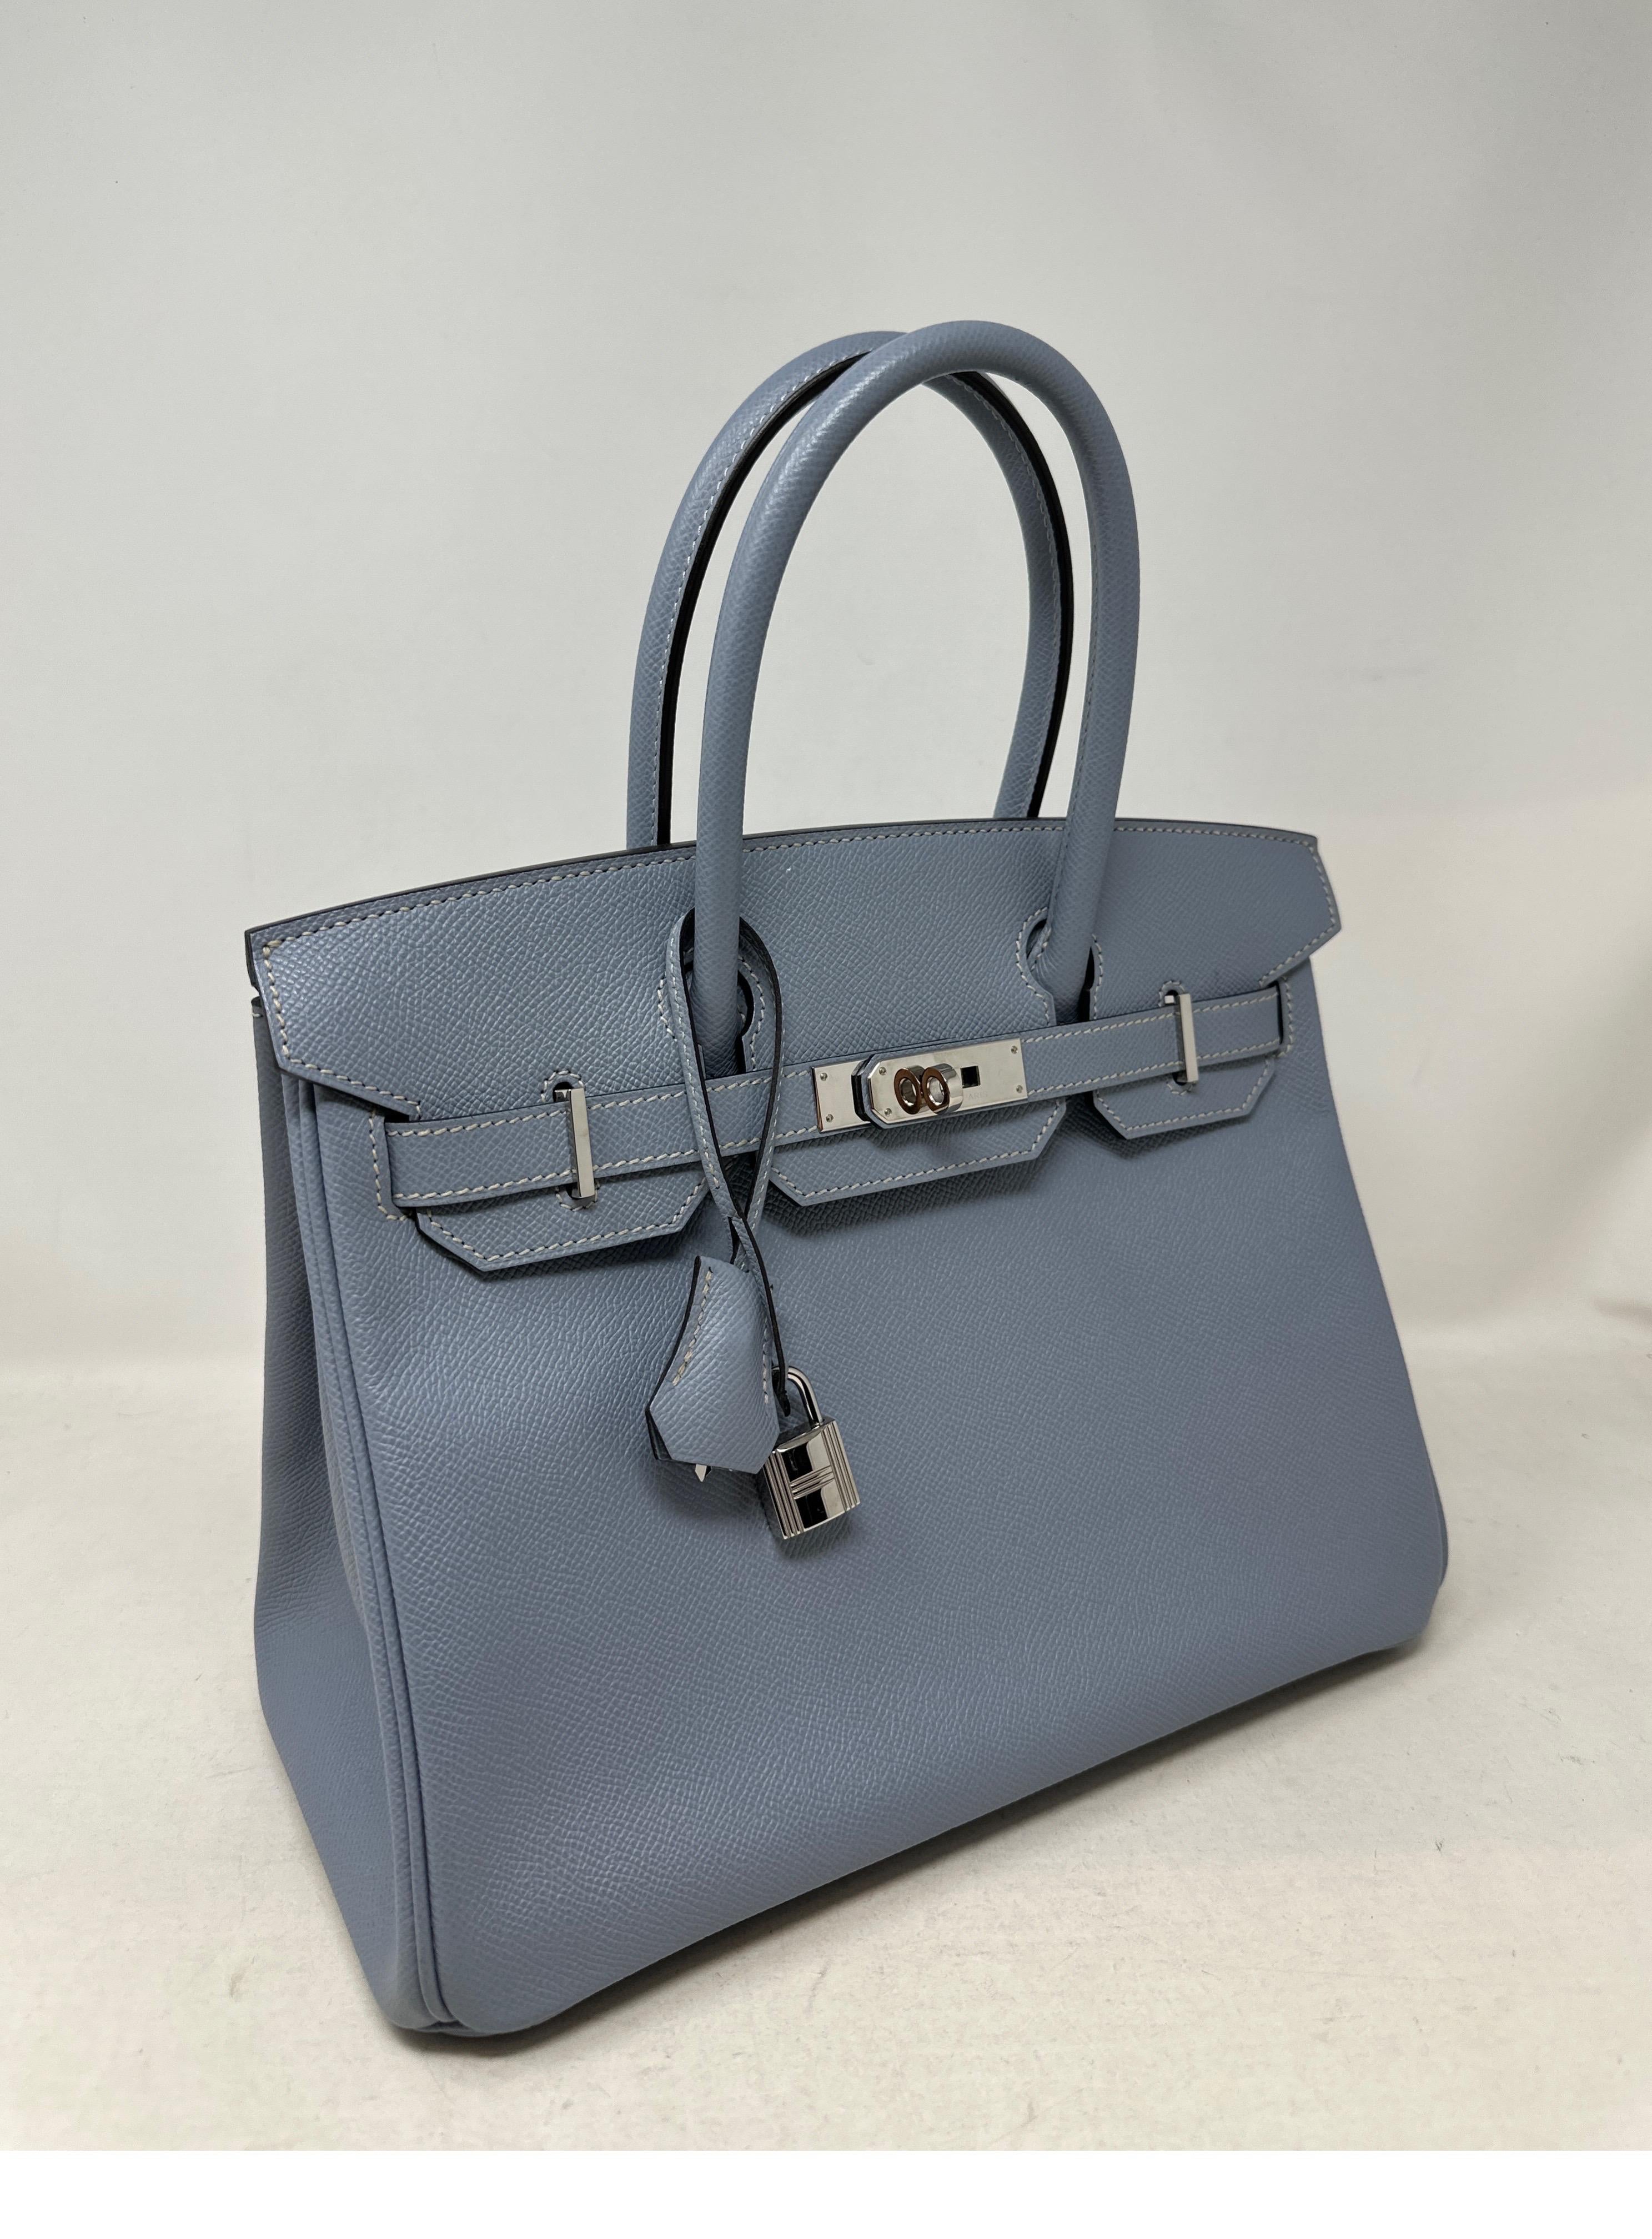 Hermes Ciel Birkin 30 Bag. Beautiful light blue grey color. Epsom leather. Palladium silver hardware. Great condition. Interior clean. Great investment bag. Includes clochette, lock, keys, and dust bag. Guaranteed authentic. 